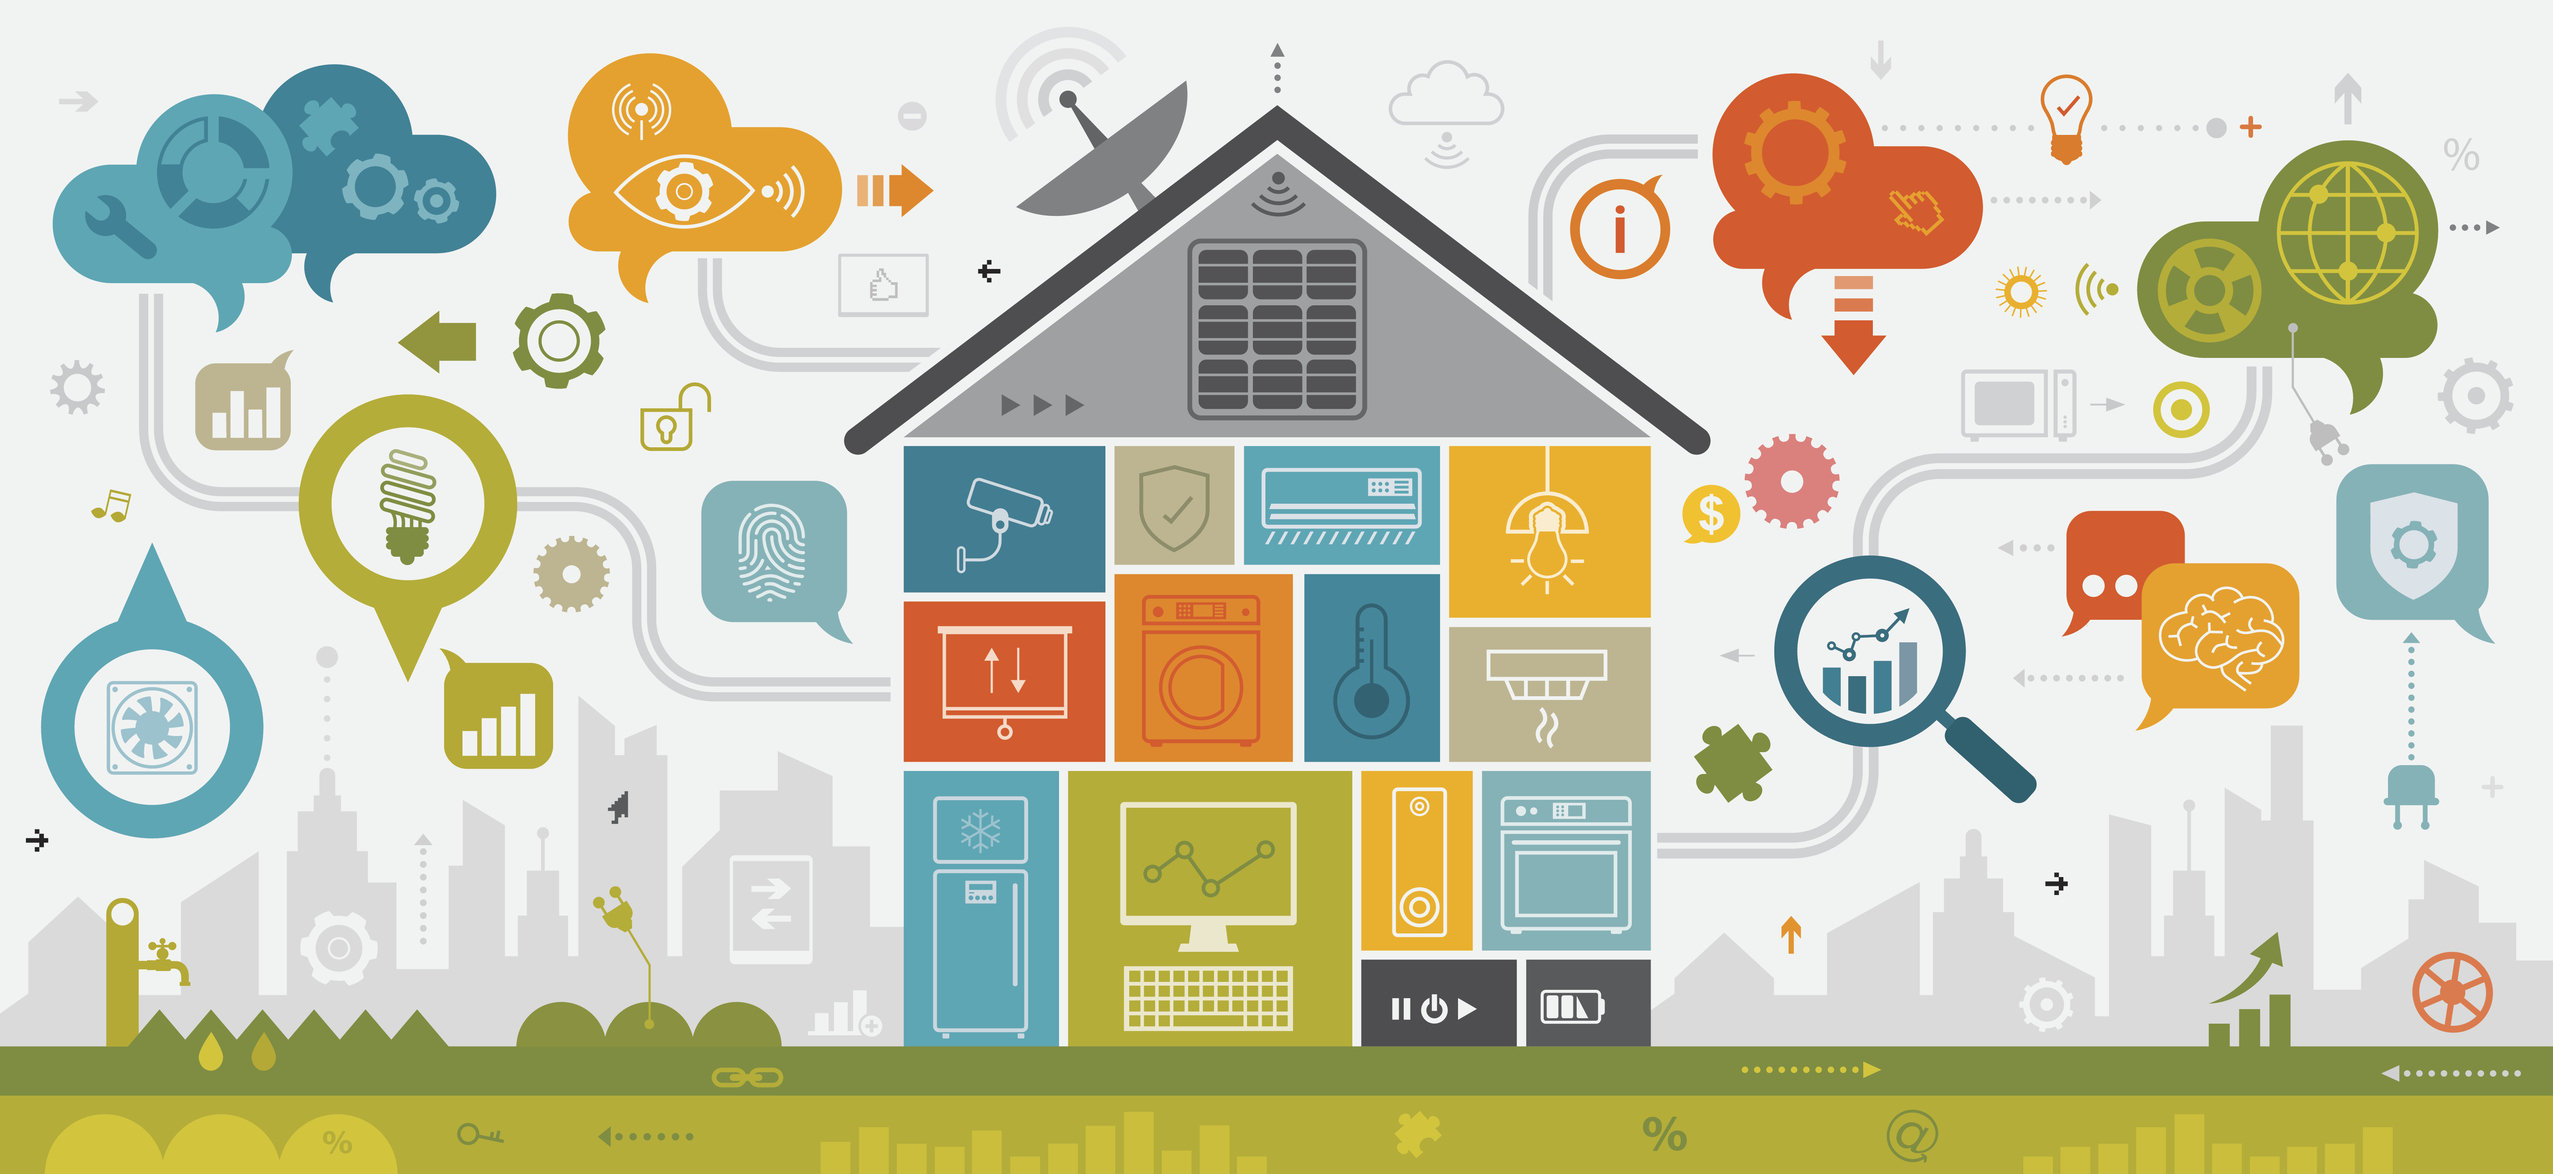 7 smart home devices to increase your property's value - Gearbrain